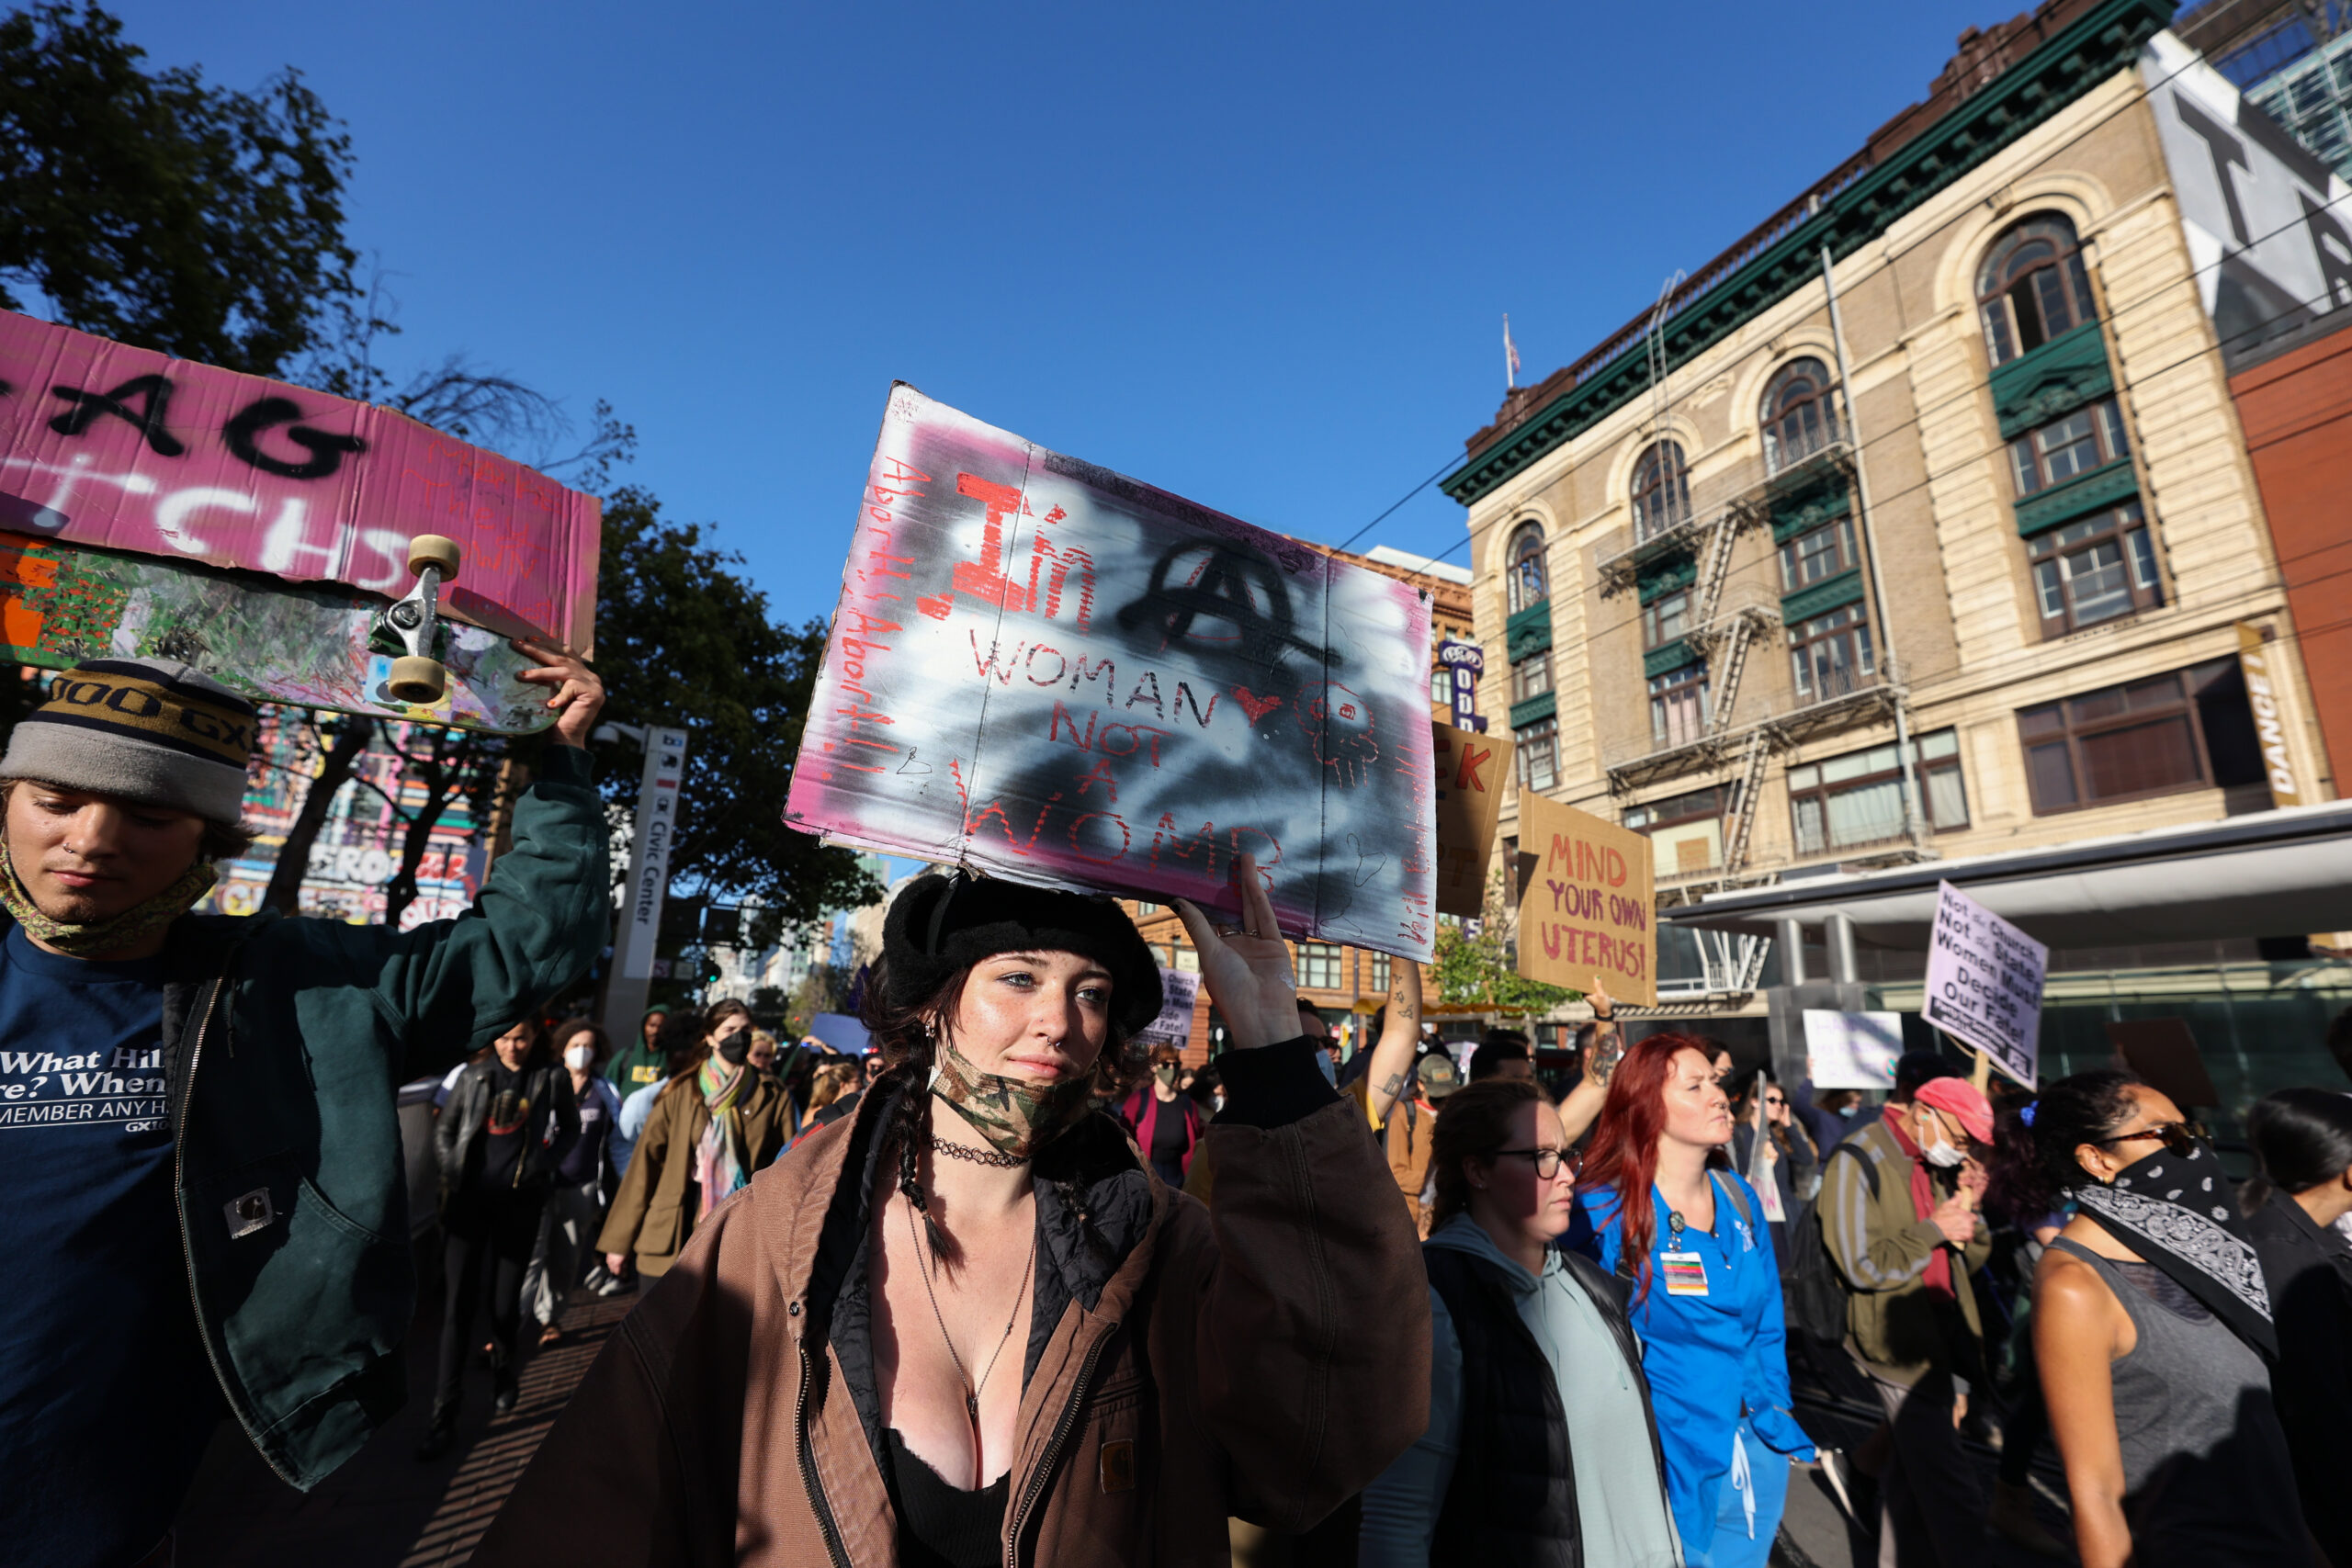 San Francisco rises up: List of abortion rights protests, activations following Roe v. Wade ruling